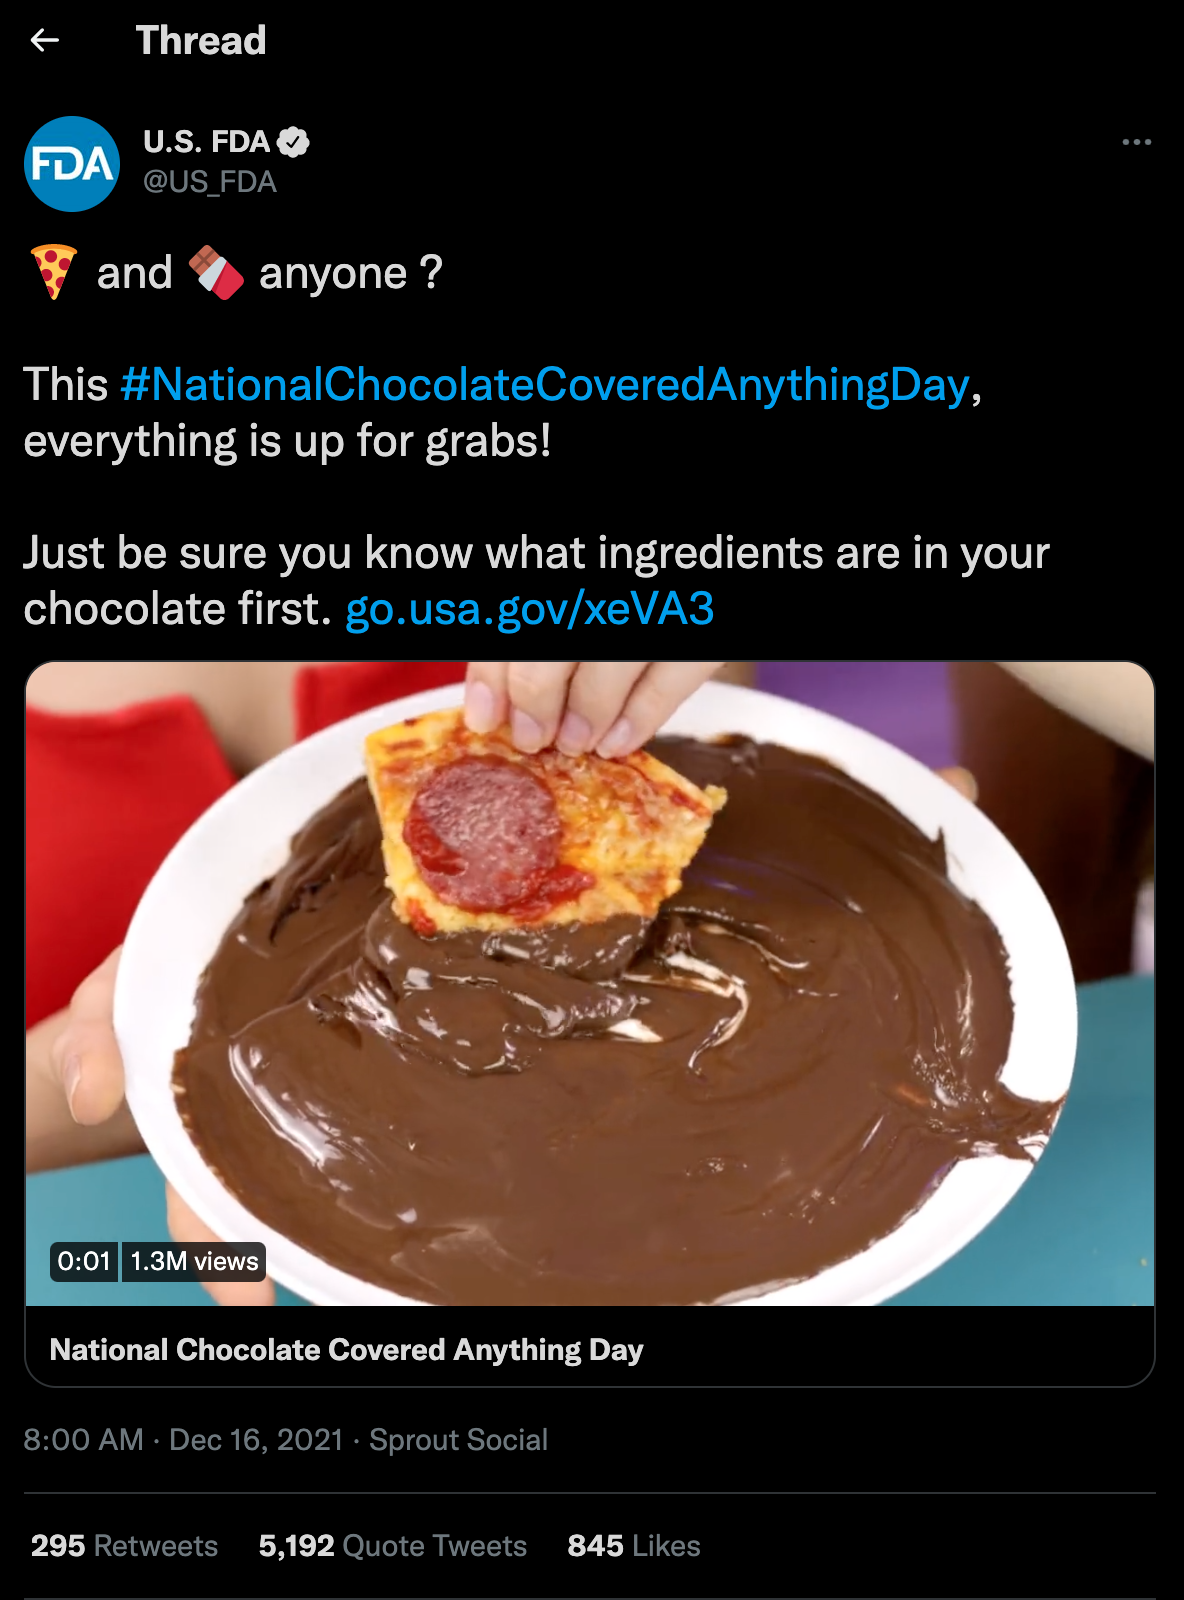 Oh wow Pizza in chocolate! That's definitely beneficial to a productive society and resolving our obesity and overweight epidemic, High Glycemic Carbs Yay!